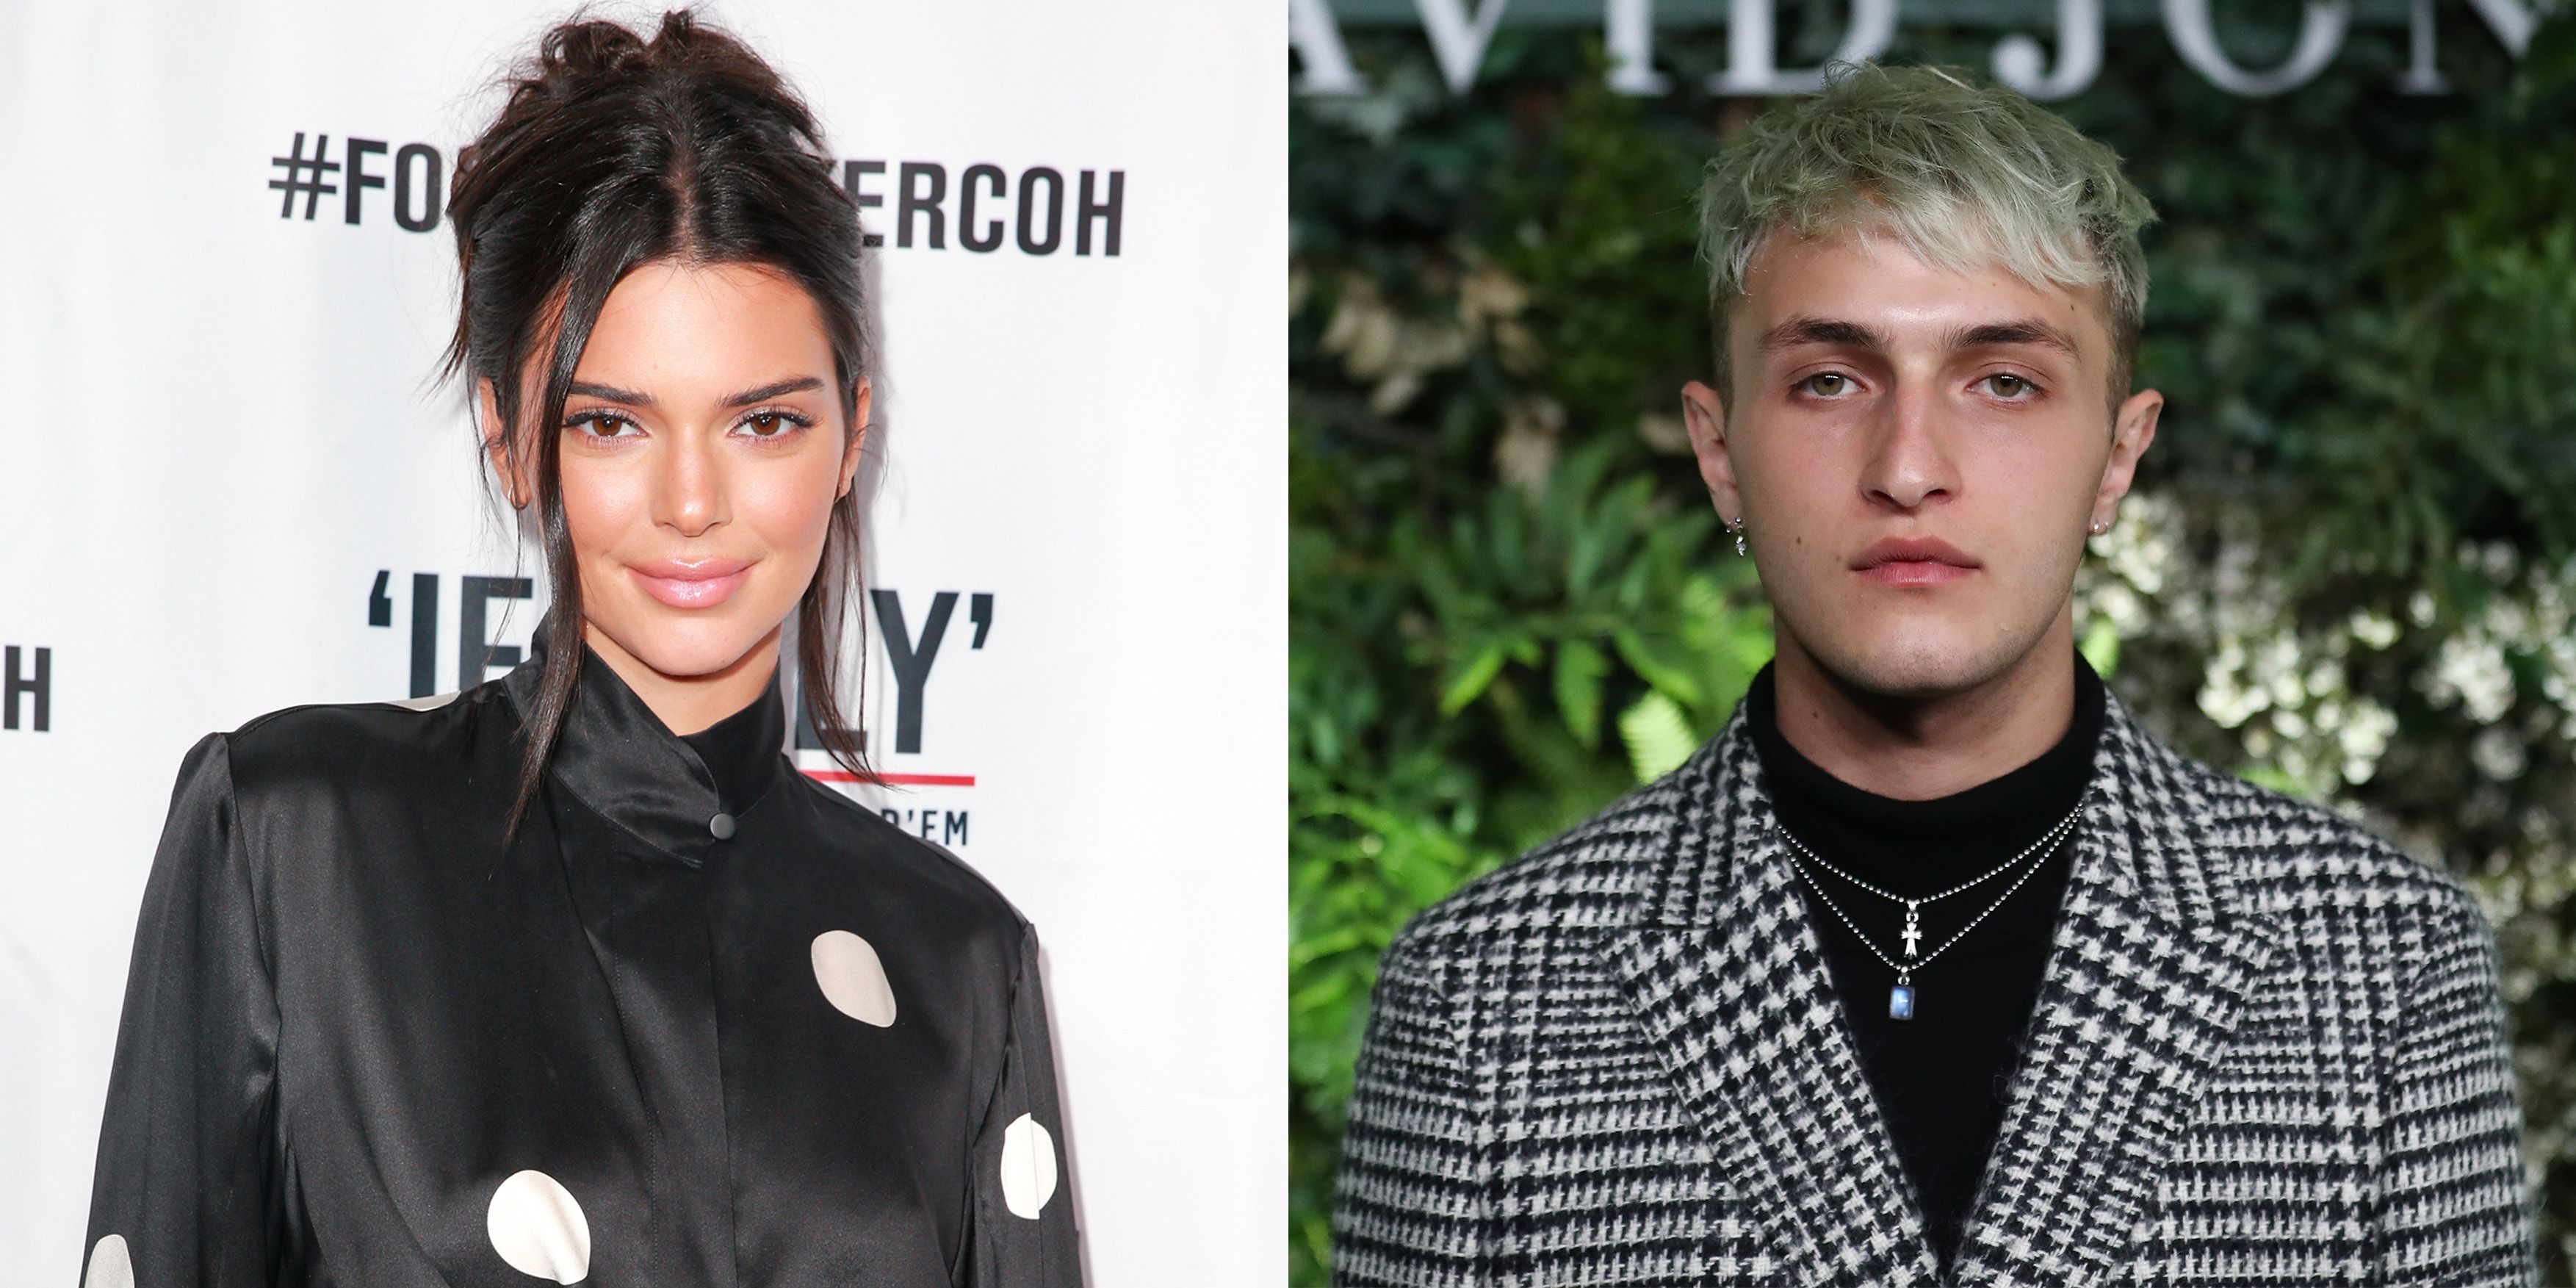 Everything We Know About Kendall Jenner's Relationship With